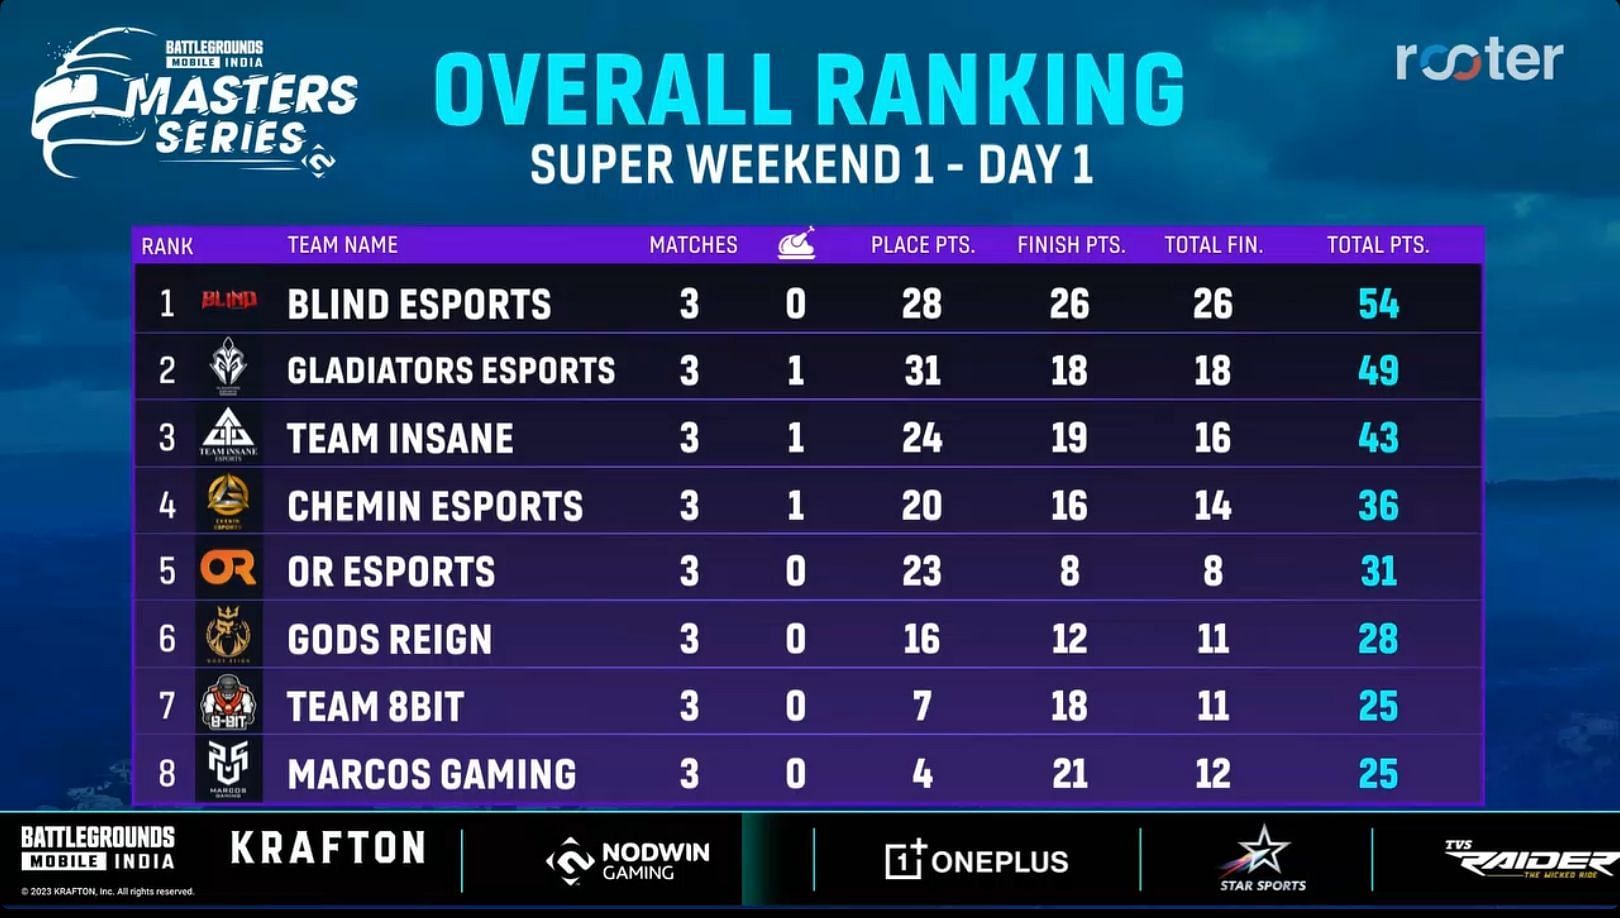 Blind Esports occupied first place on Super Weekend 1 Day 1 (Image via Rooter)